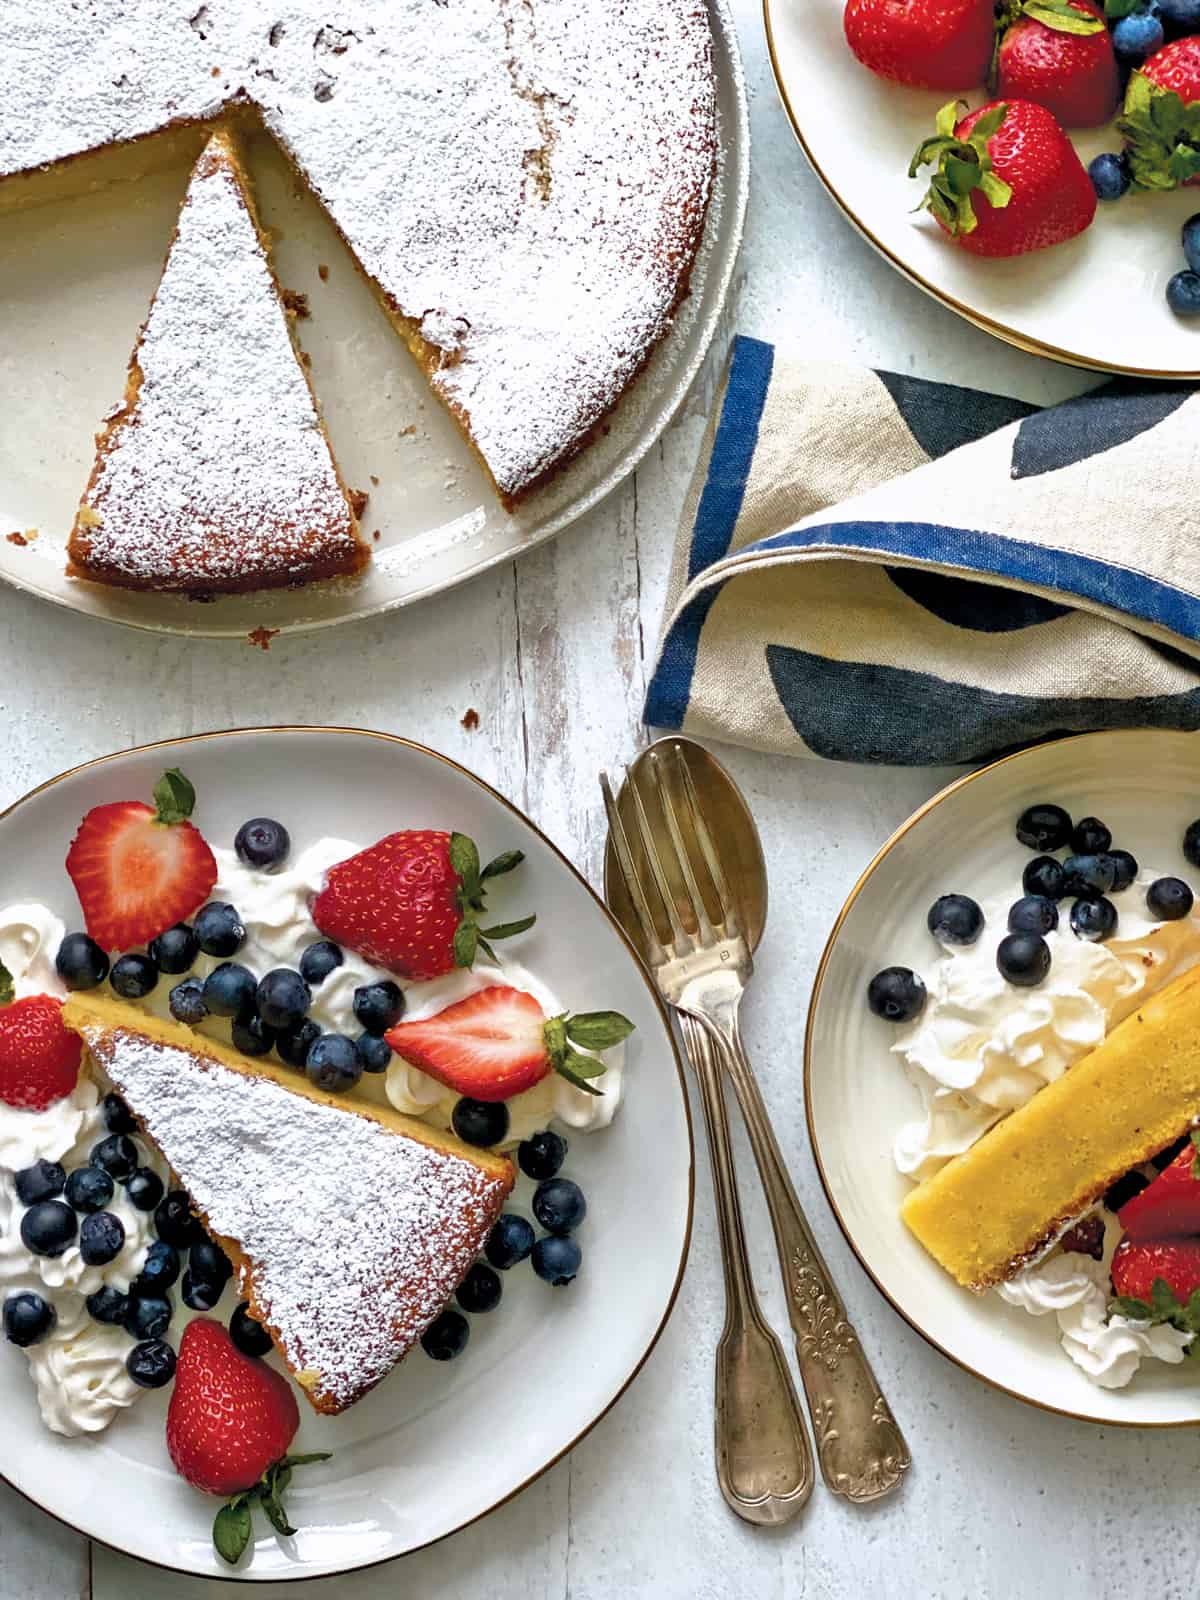 A piece of Meyer lemon olive oil cake with whipped cream and berries on two plates, at the back a cake on a platter.